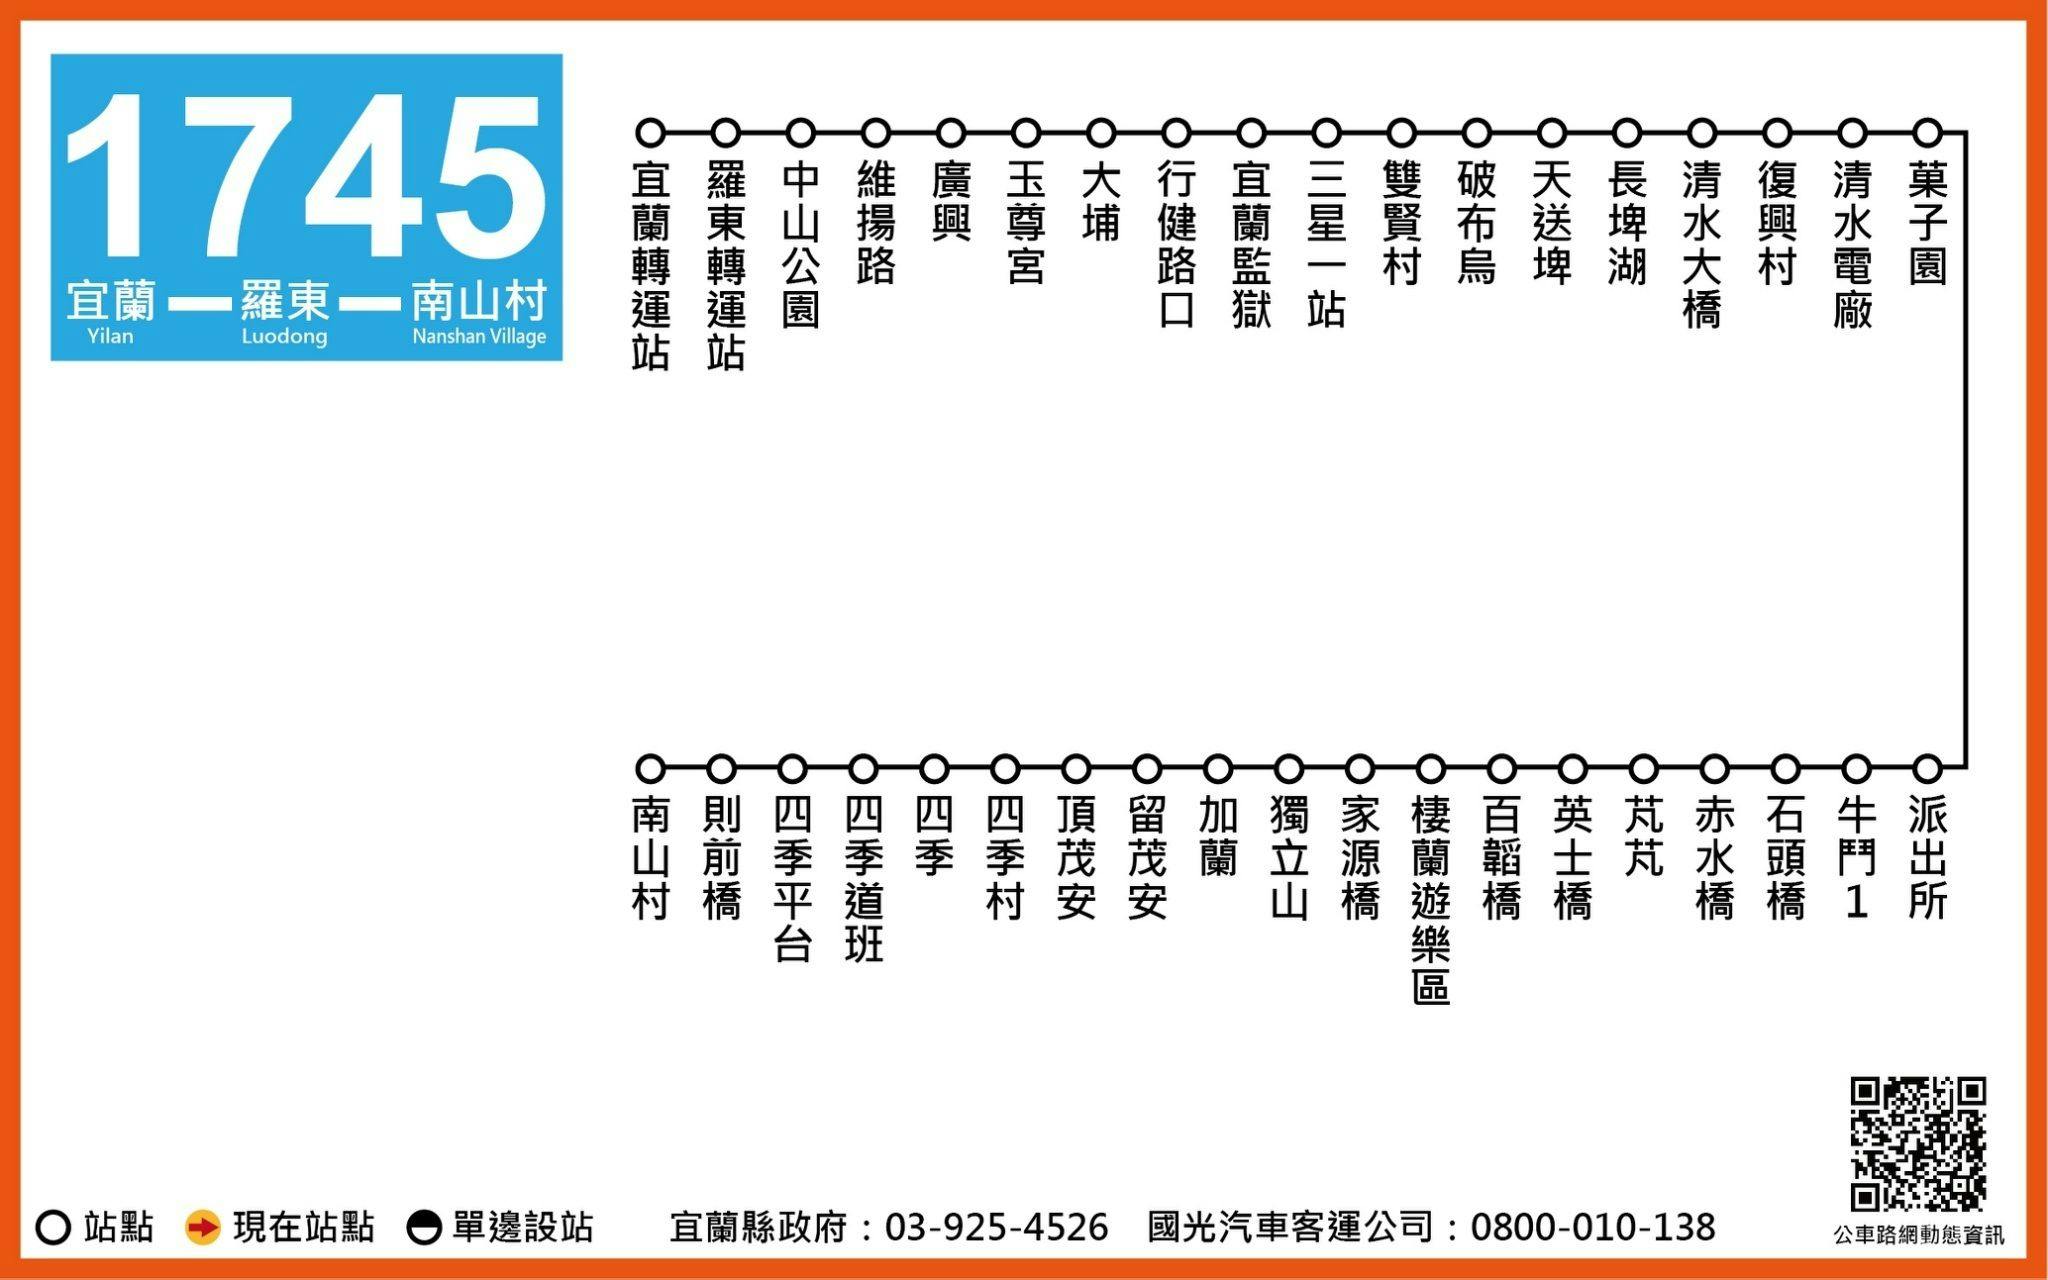 1745Route Map-宜蘭 Bus